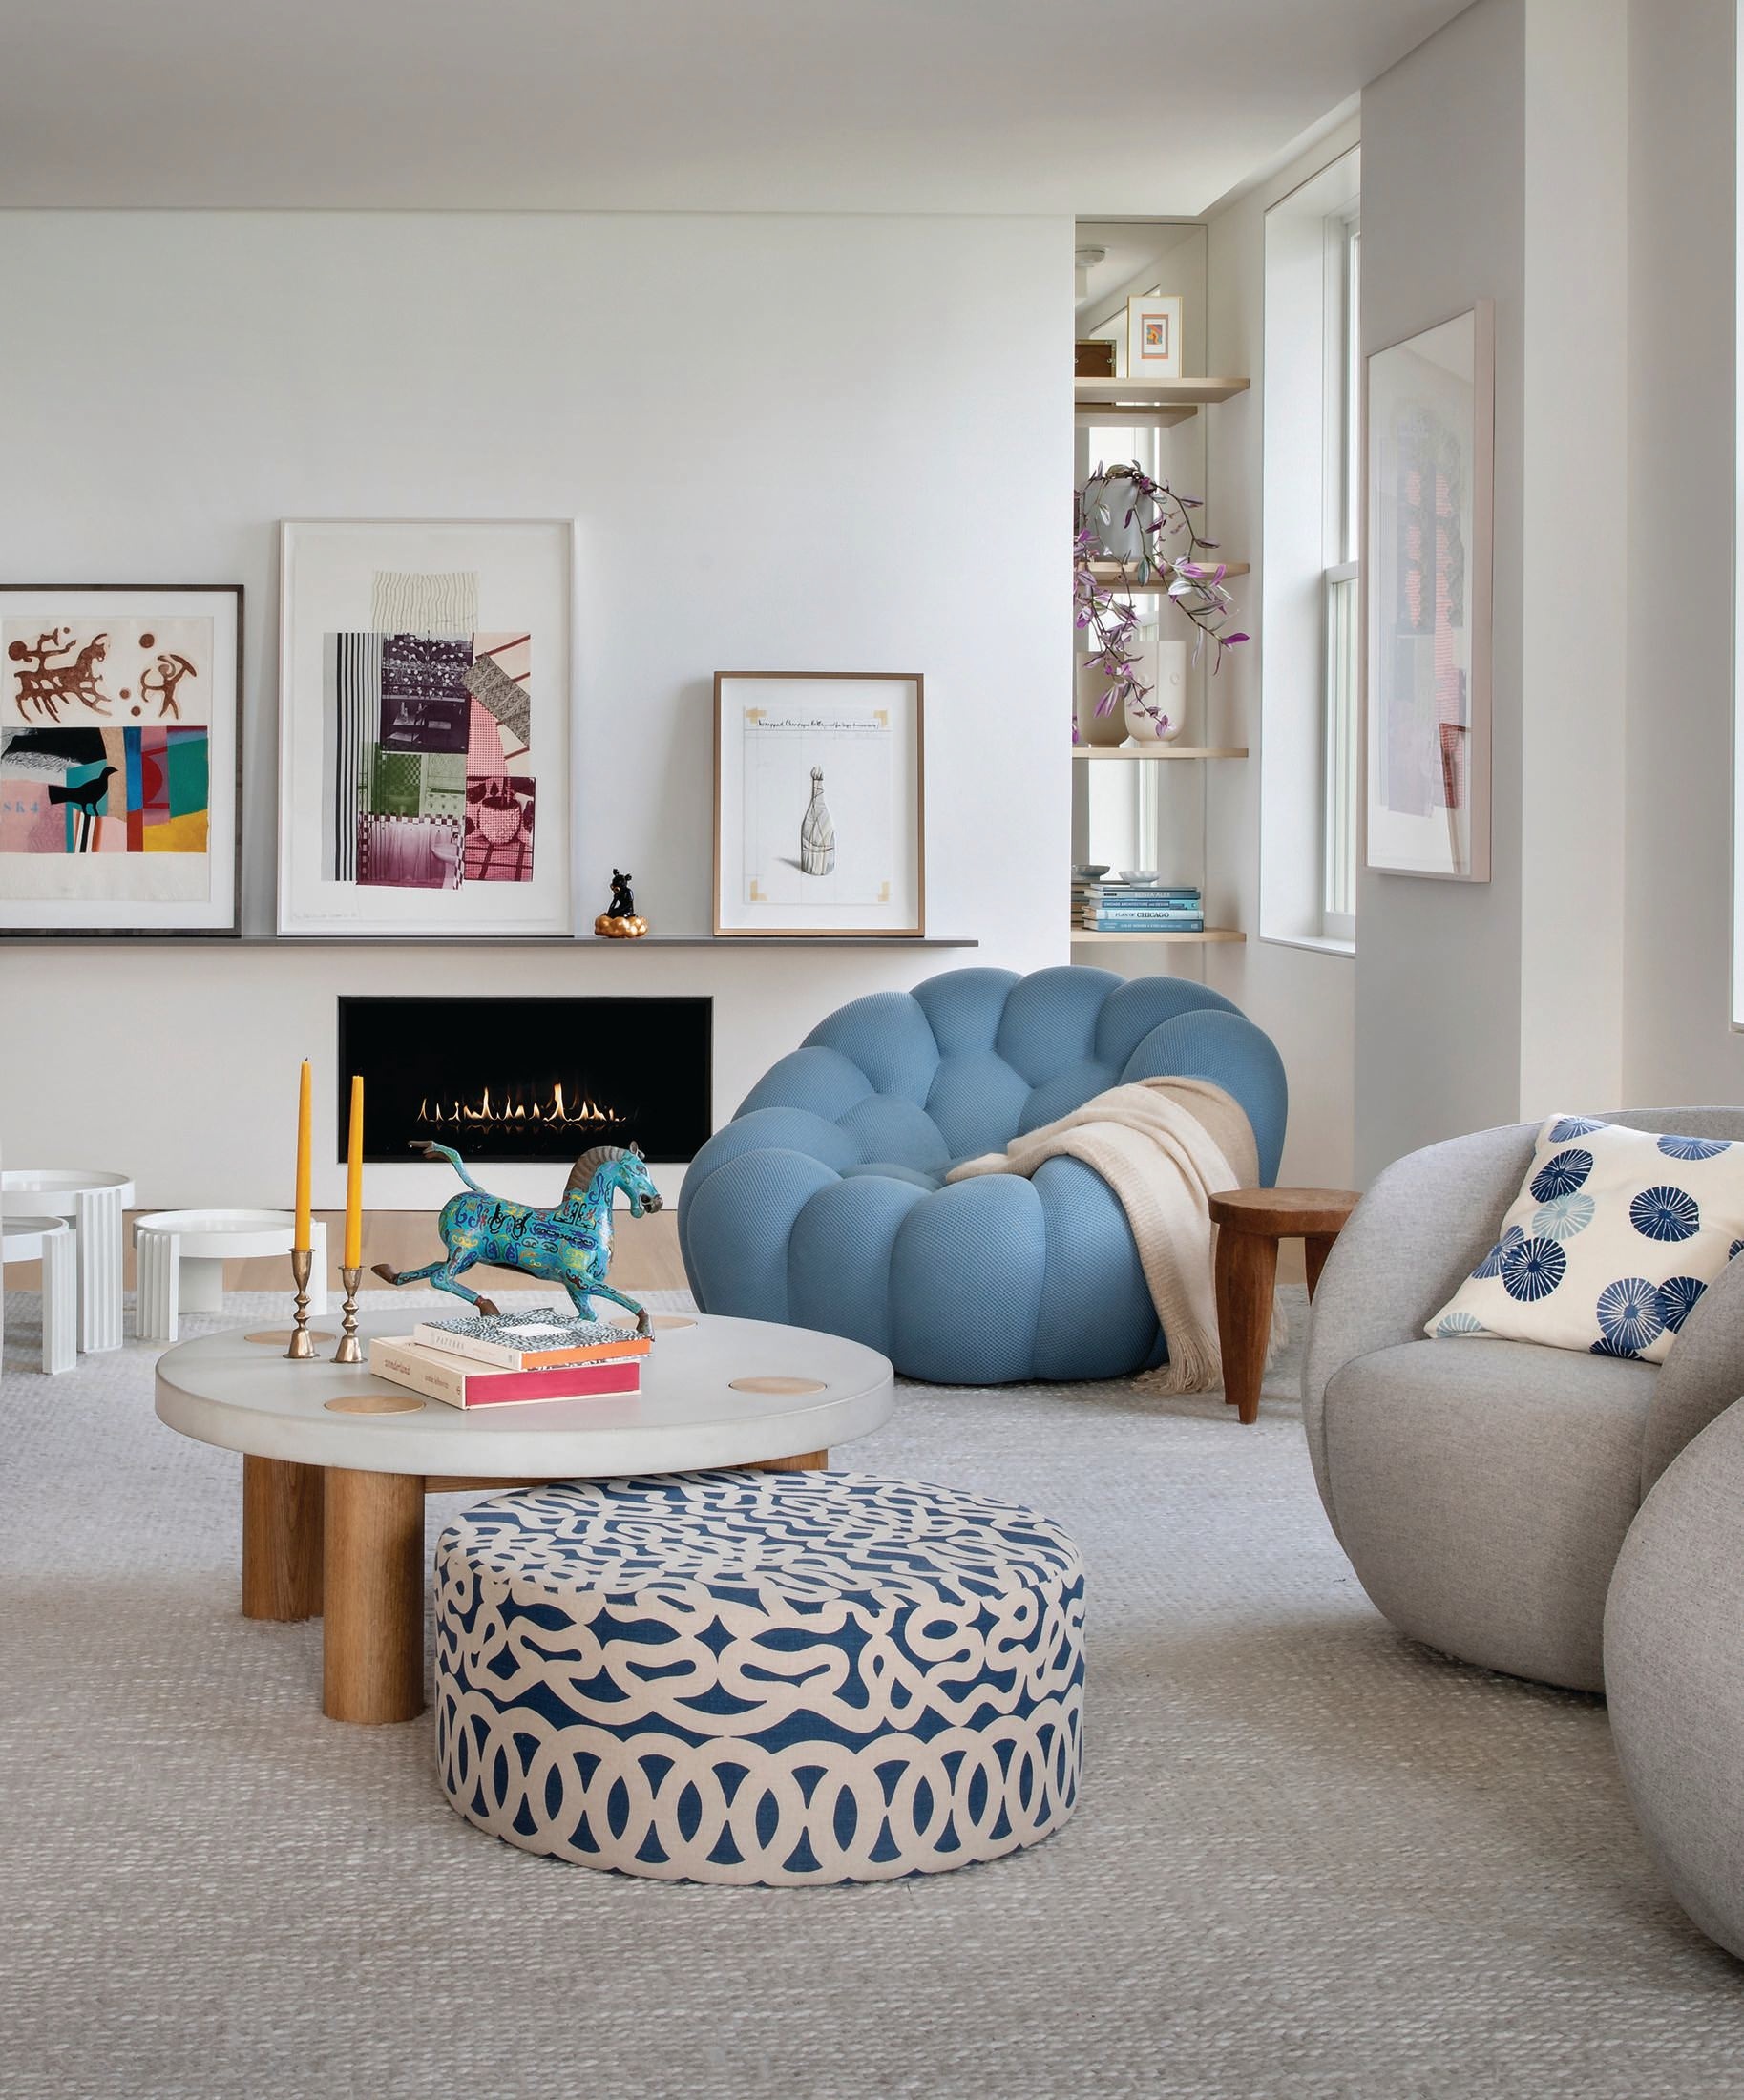 The living room pops with Roche Bobois’ Bubble pivoting armchair upholstered in Marina 2014 Techno 2D, a custom concrete-topped coffee table by Greyscape Studio, and a custom ottoman by Rooster Socks Furniture upholstered in indigo unbleached linen by Raoul Textiles, plus art pieces from the clients’ collection. Photographed by Gibeon Photography